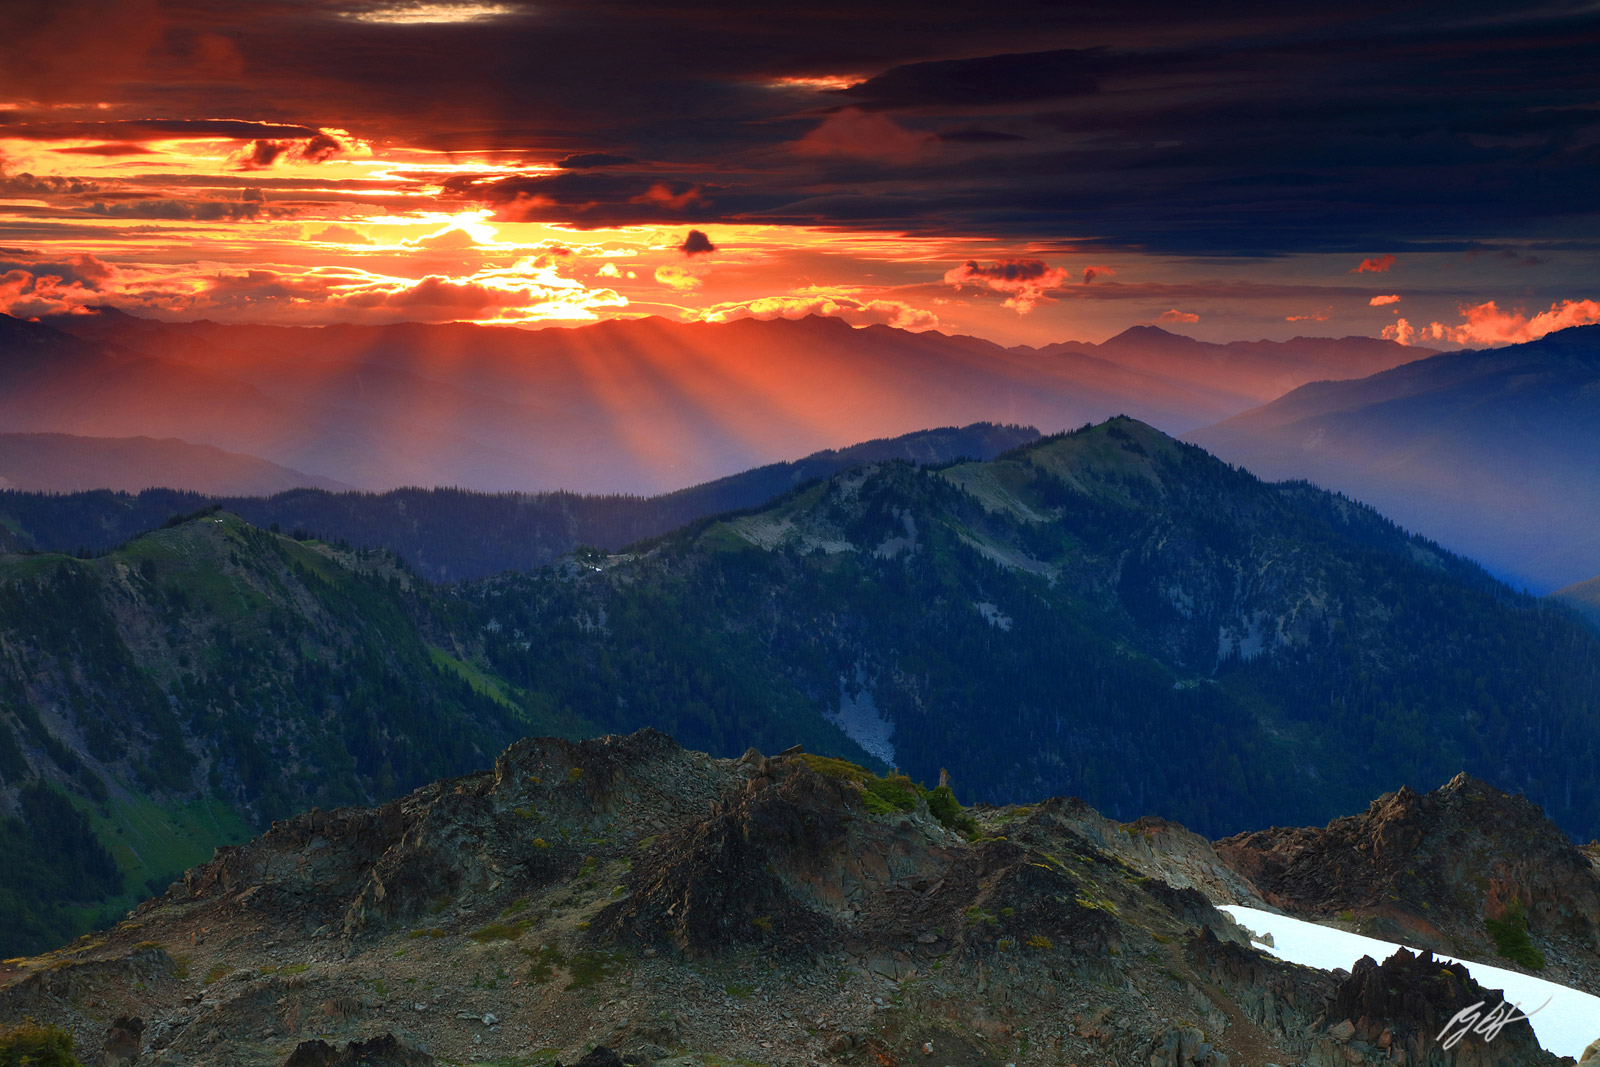 Sunset Olympic Mountains from Grand Peak in Olympic National Park in Washington